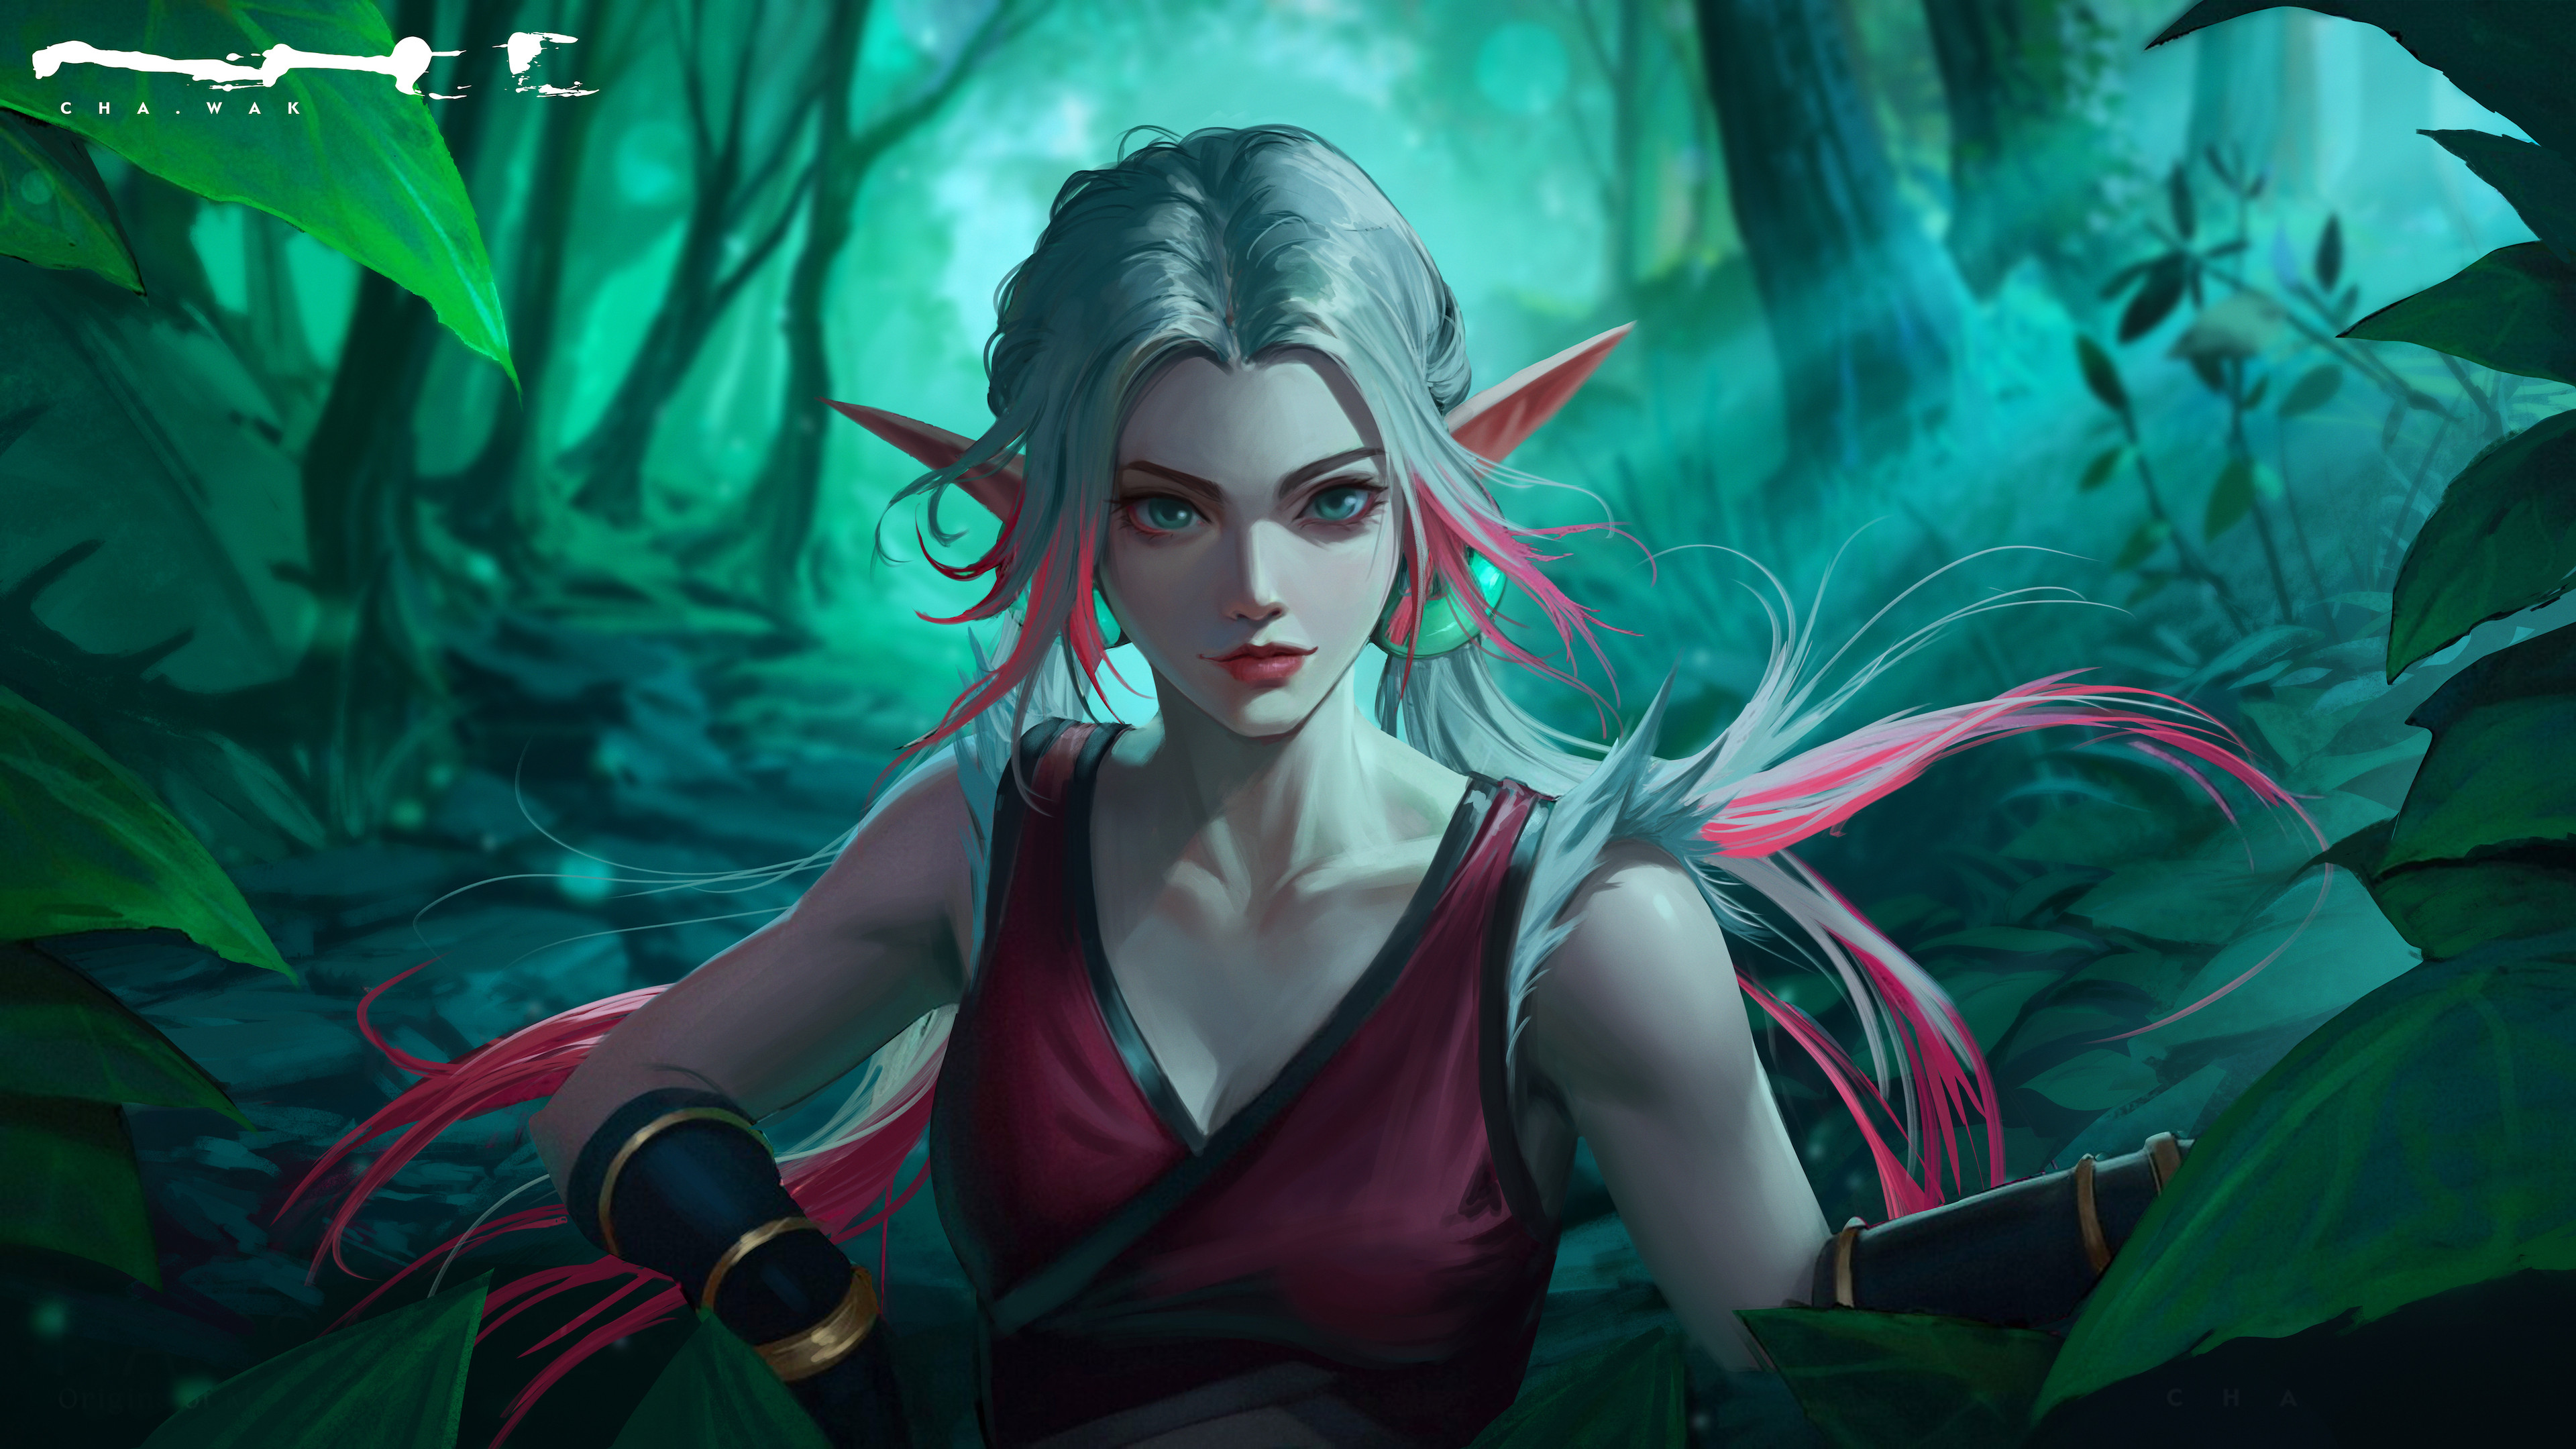 General 3840x2160 digital art artwork illustration women fantasy art fantasy girl pointy ears long hair forest 4K nature plants elves leaves trees looking at viewer two tone hair foliage CHA WAK